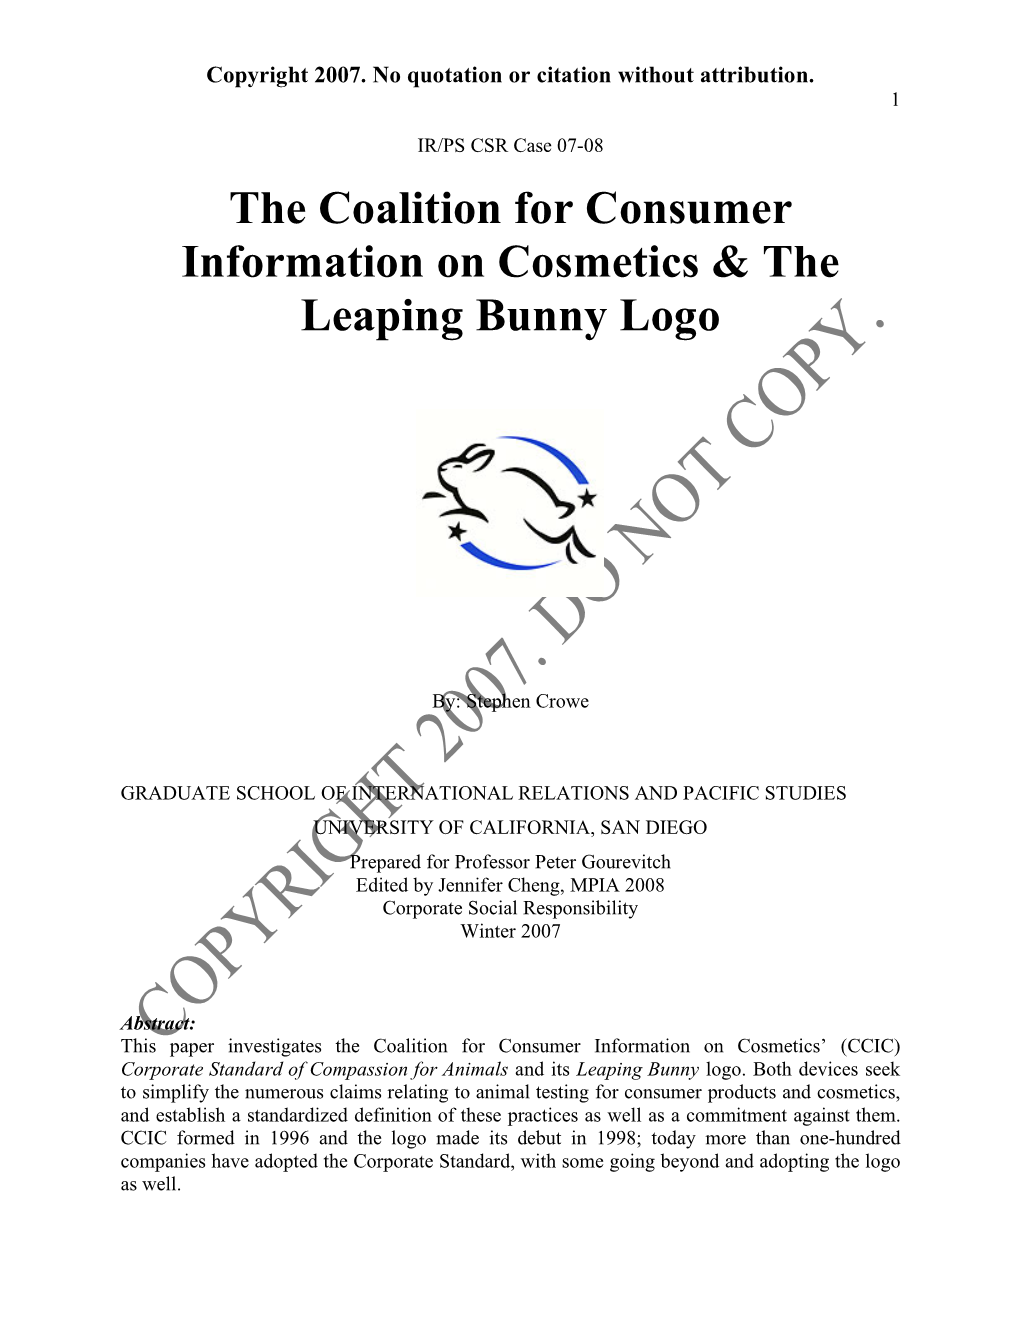 The Coalition for Consumer Information on Cosmetics & The